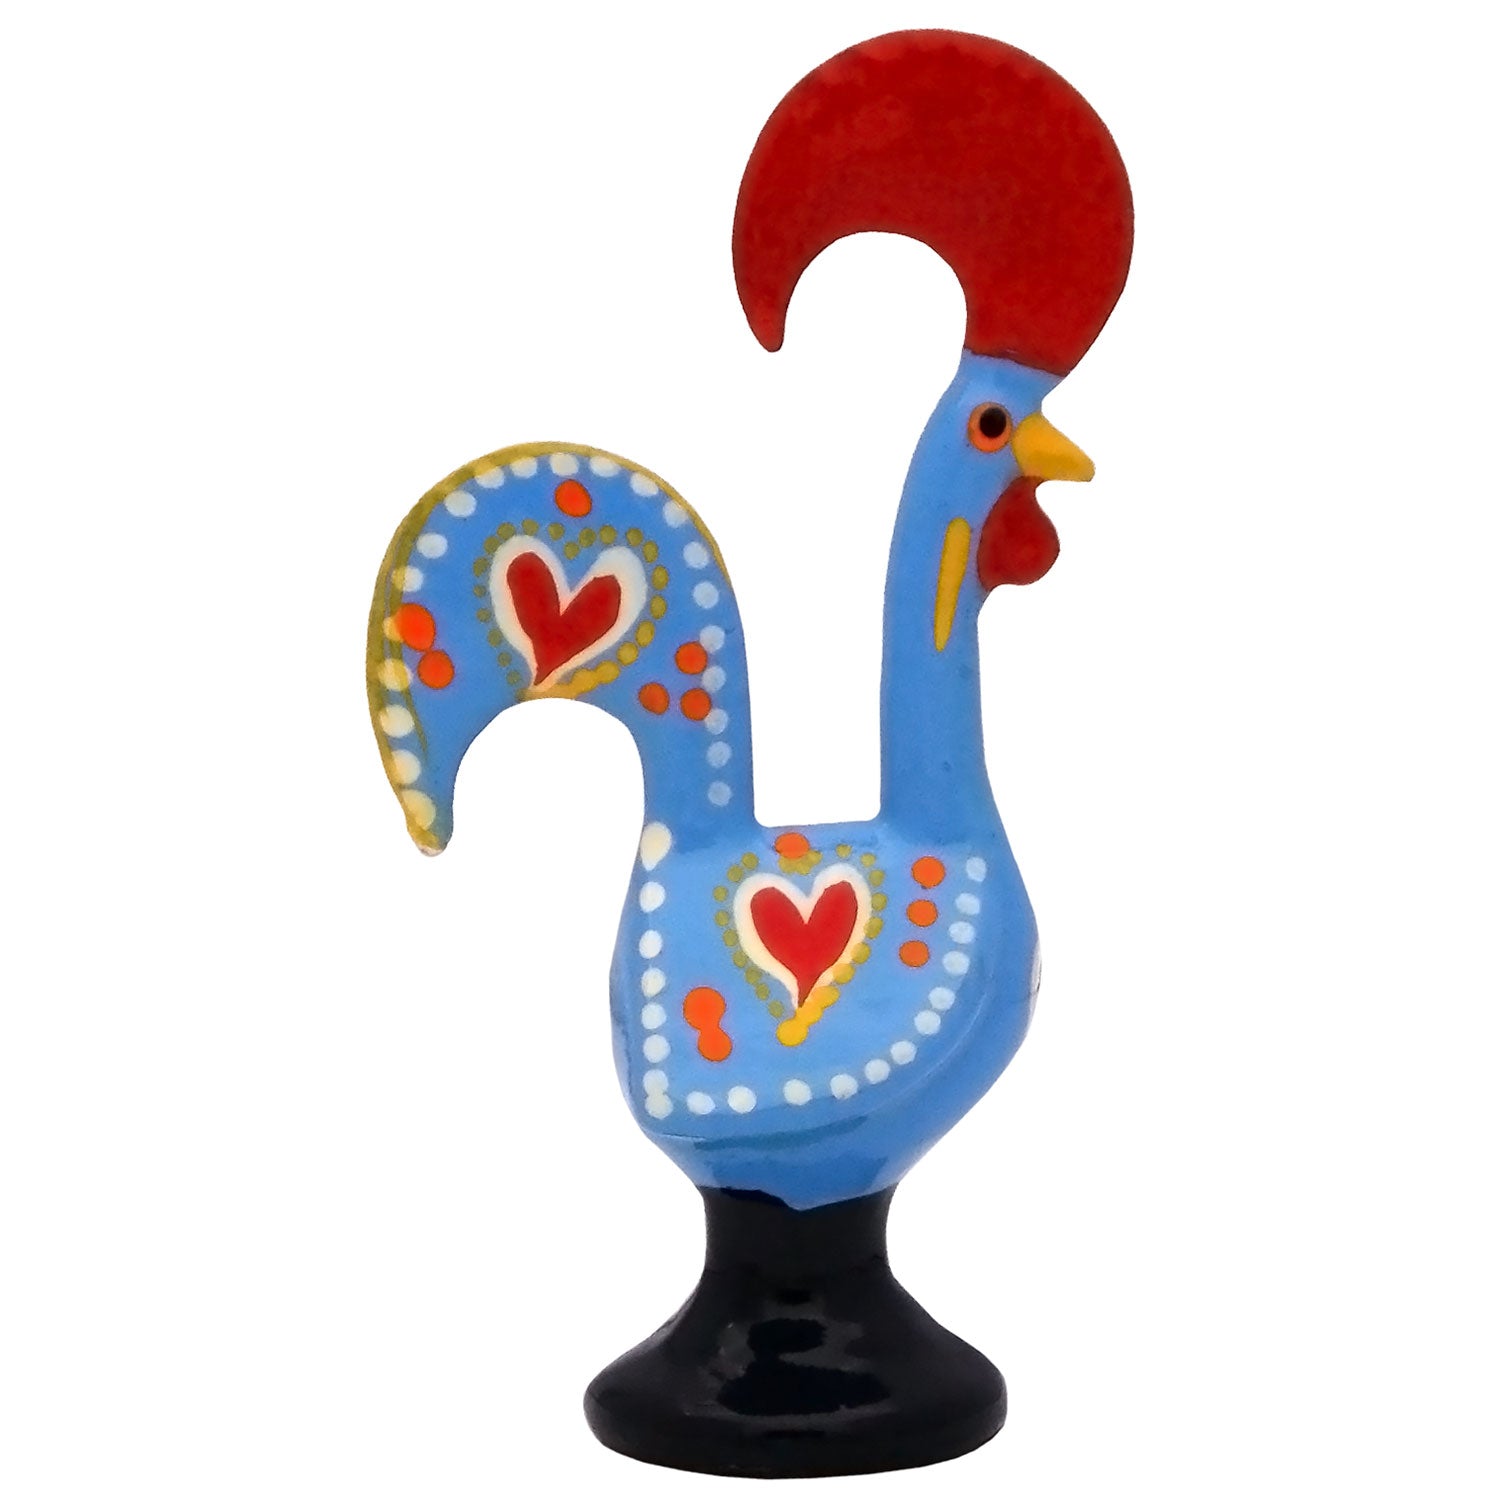 4 Inch Good Luck Portuguese Rooster Barcelos Metallic Figurine